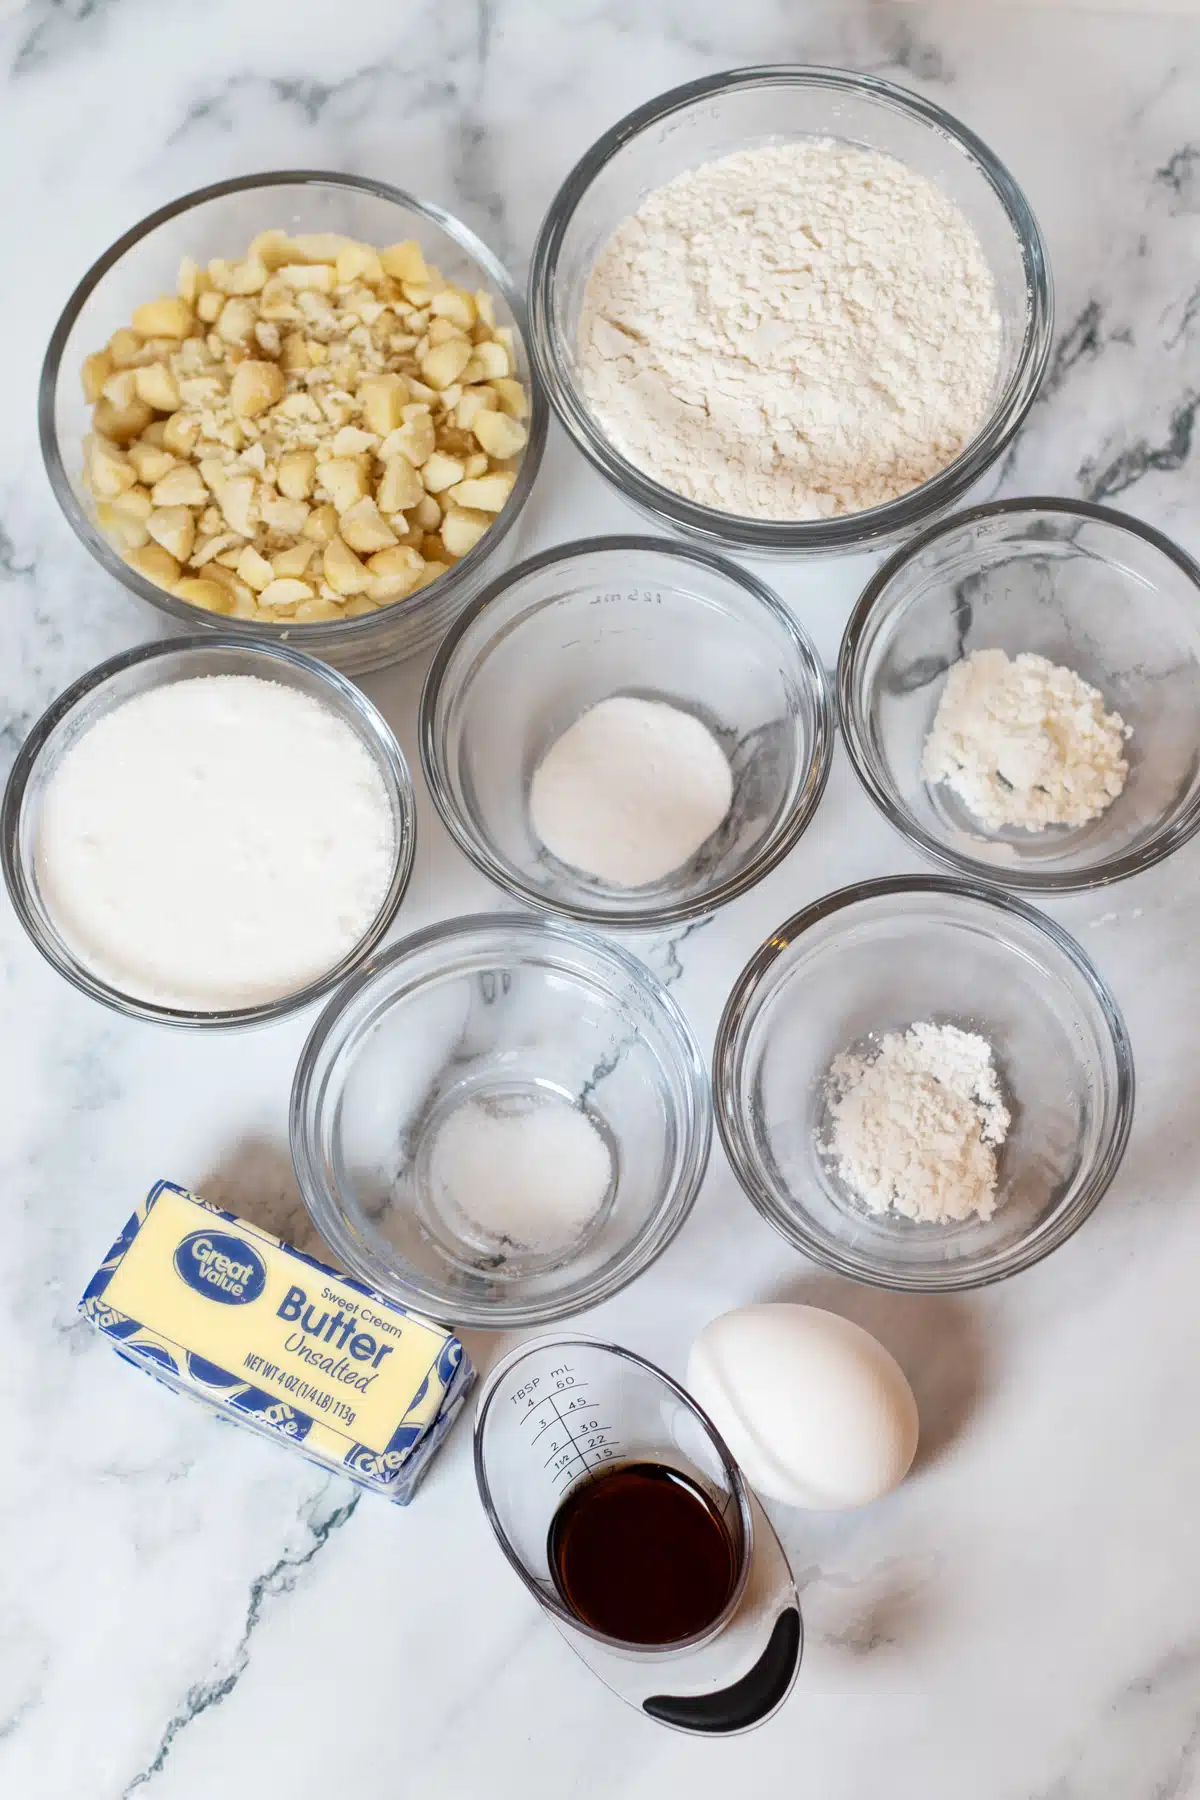 Macadamia nut cookies recipe ingredients measured out and ready to mix, chill, and bake.